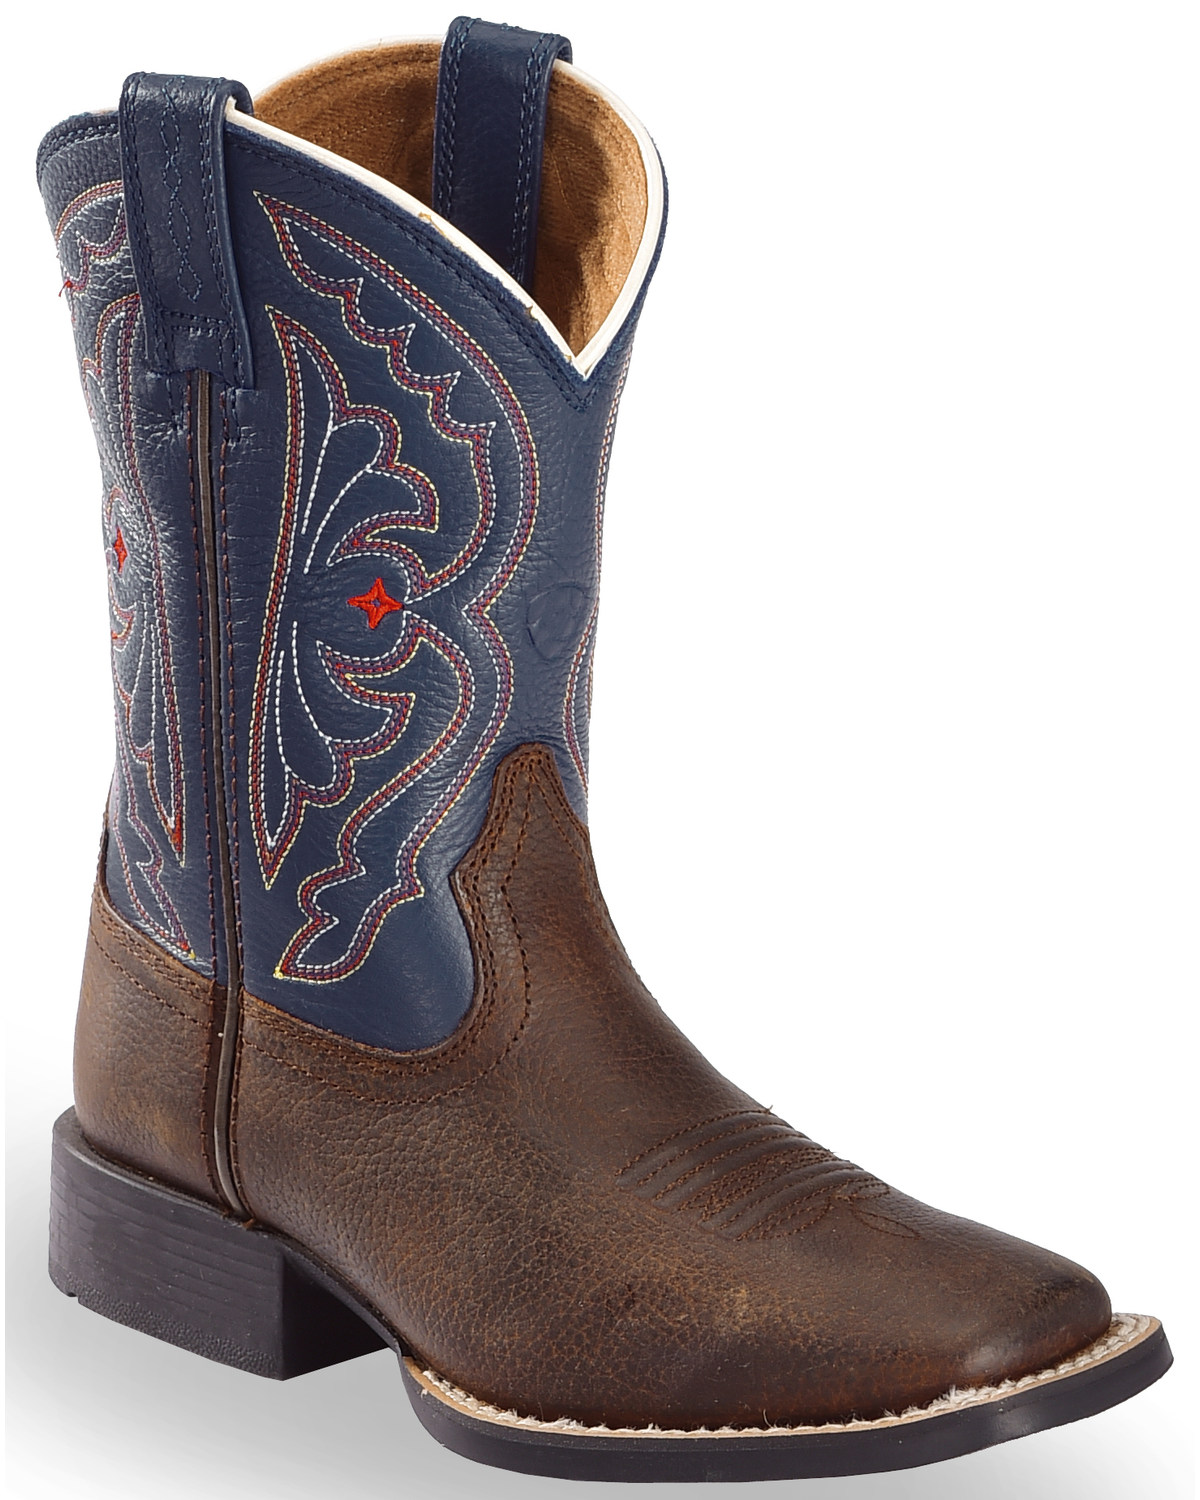 Ariat Boys' Quickdraw Western Boots - Square Toe